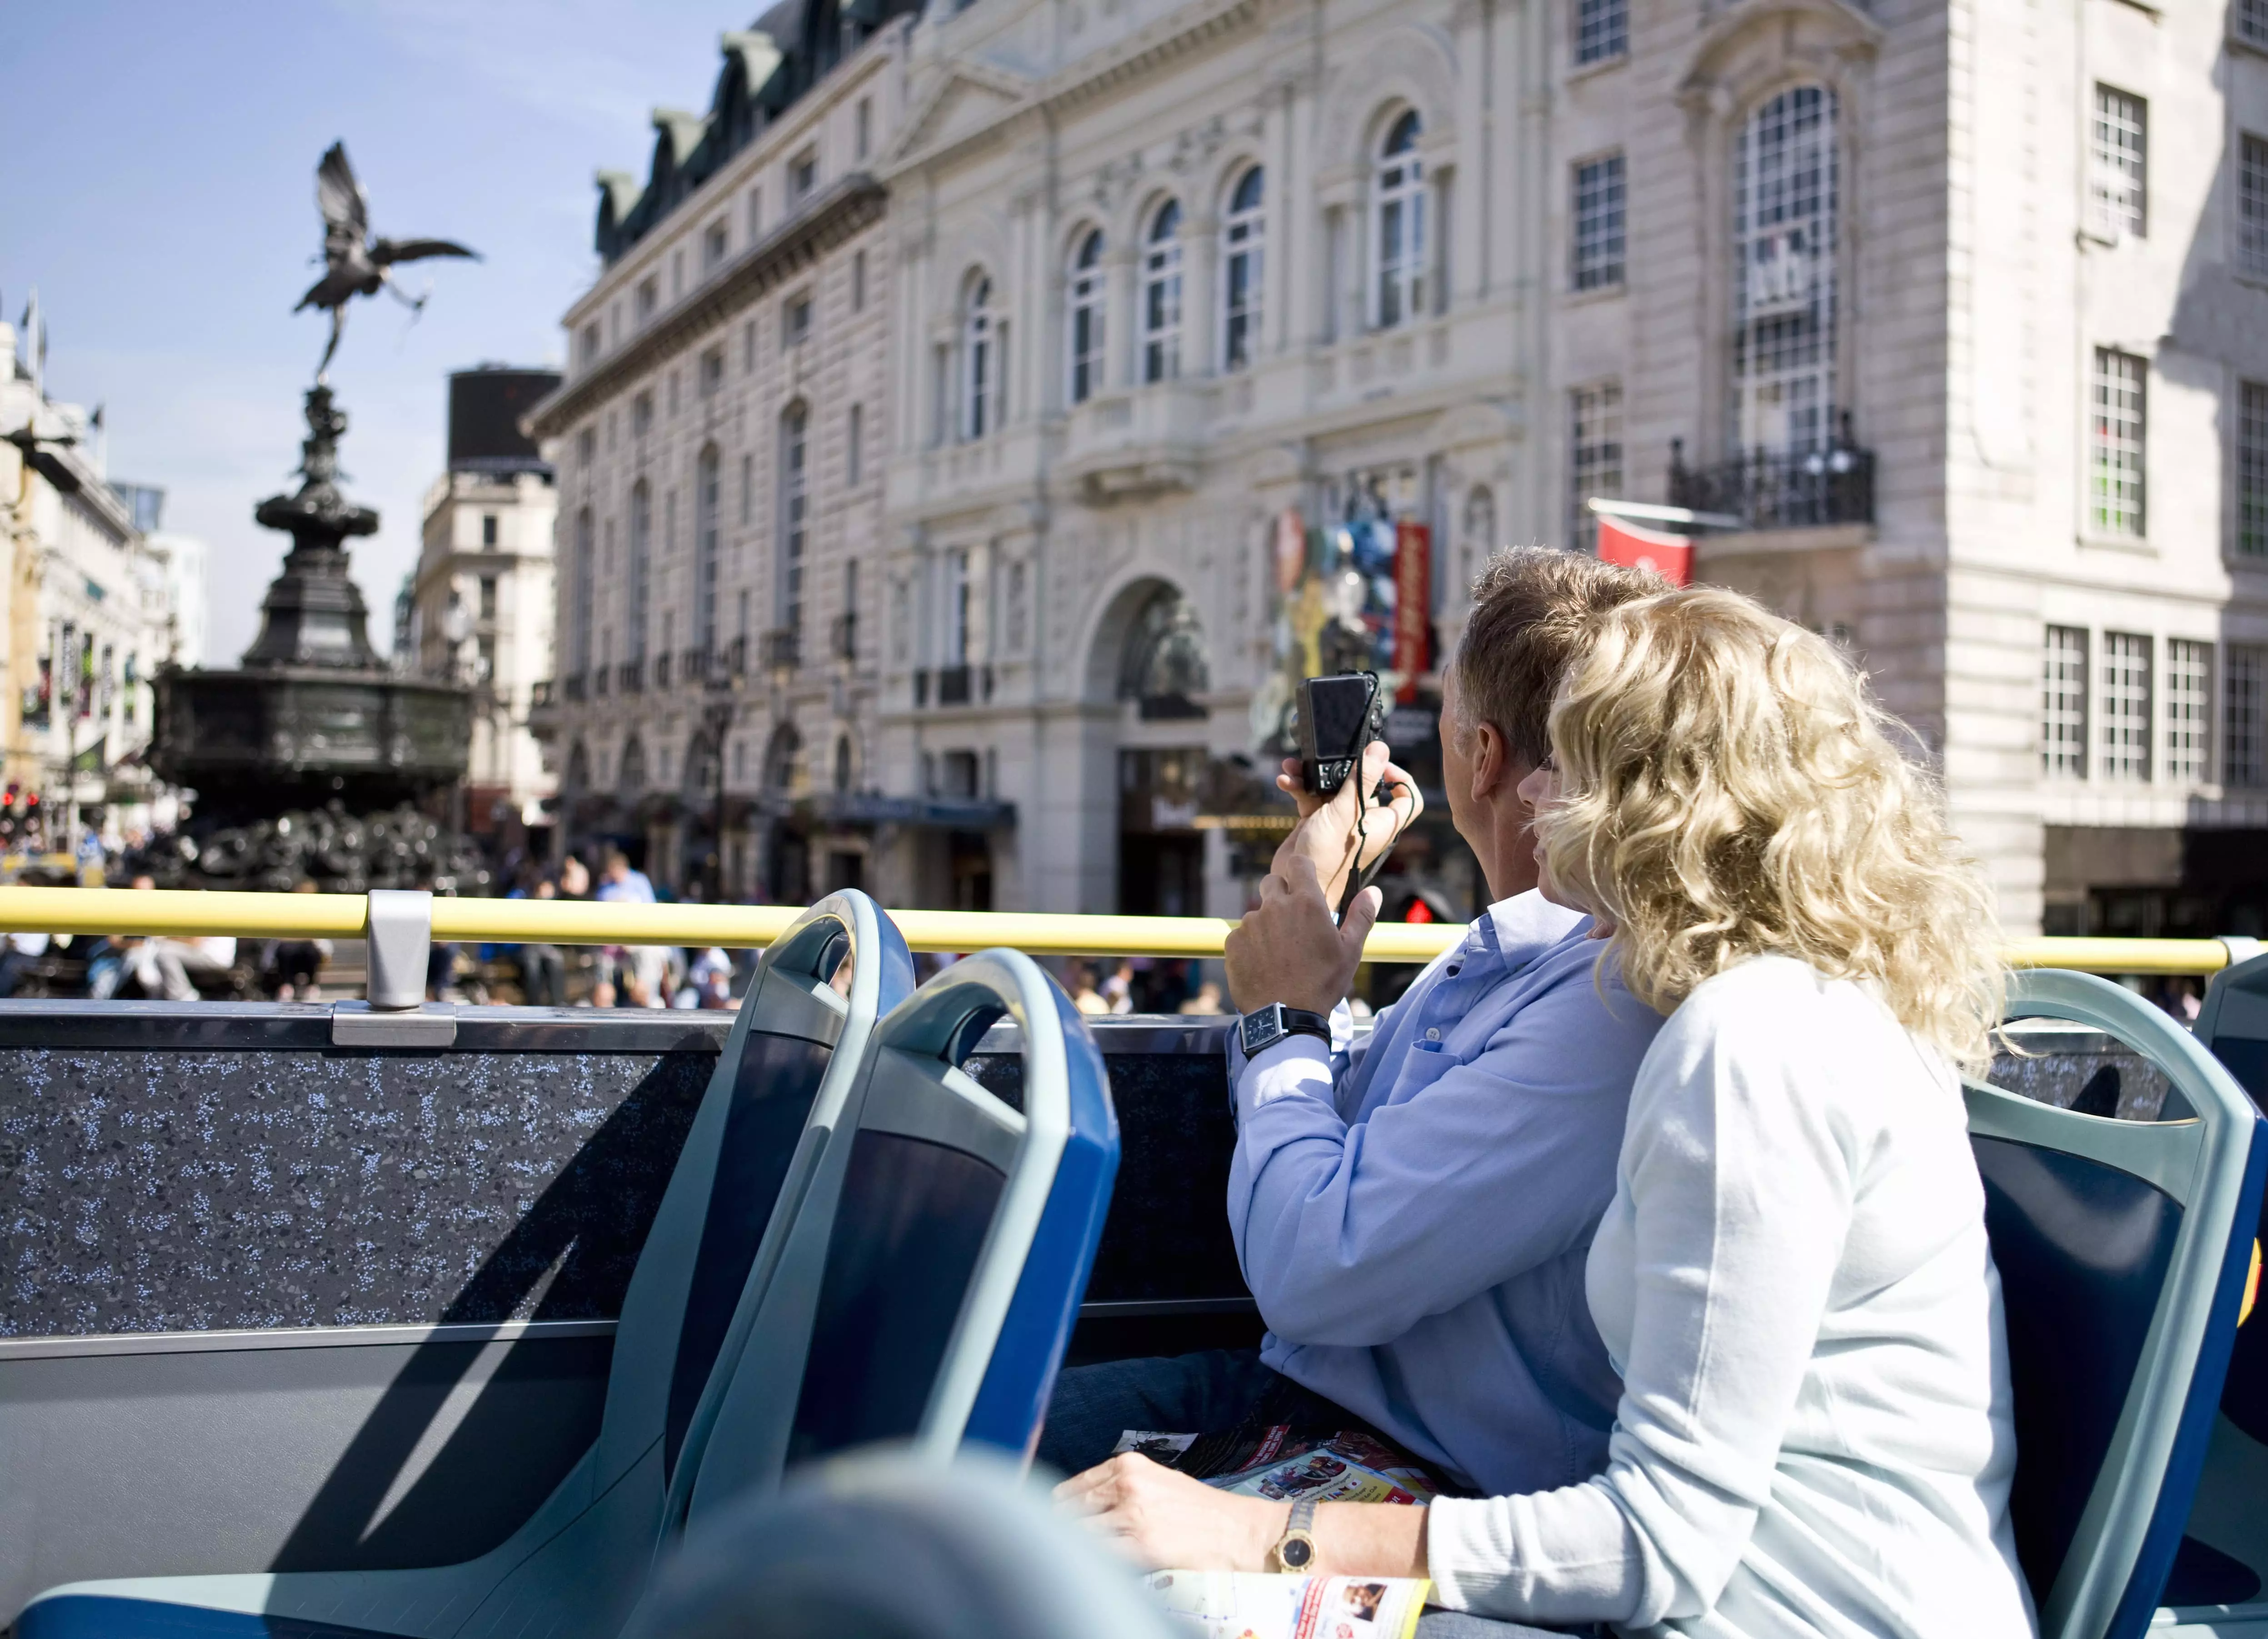 A middle-aged couple sitting on a London sightseeing bus, taking photographs of Piccadilly Circus